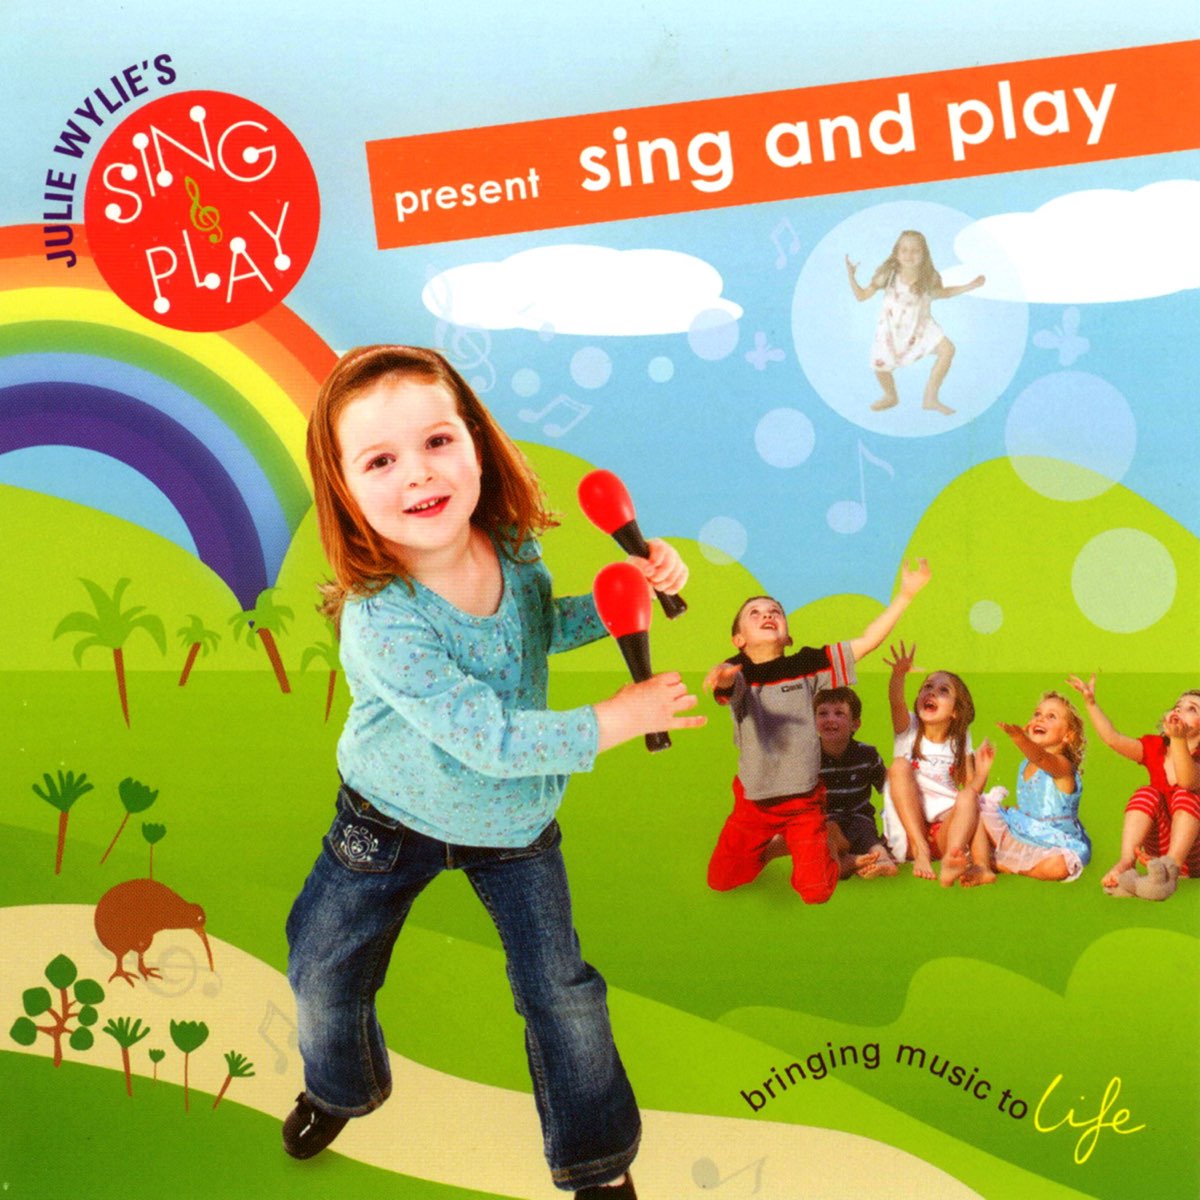 Sing and play 3. Play and Sing.